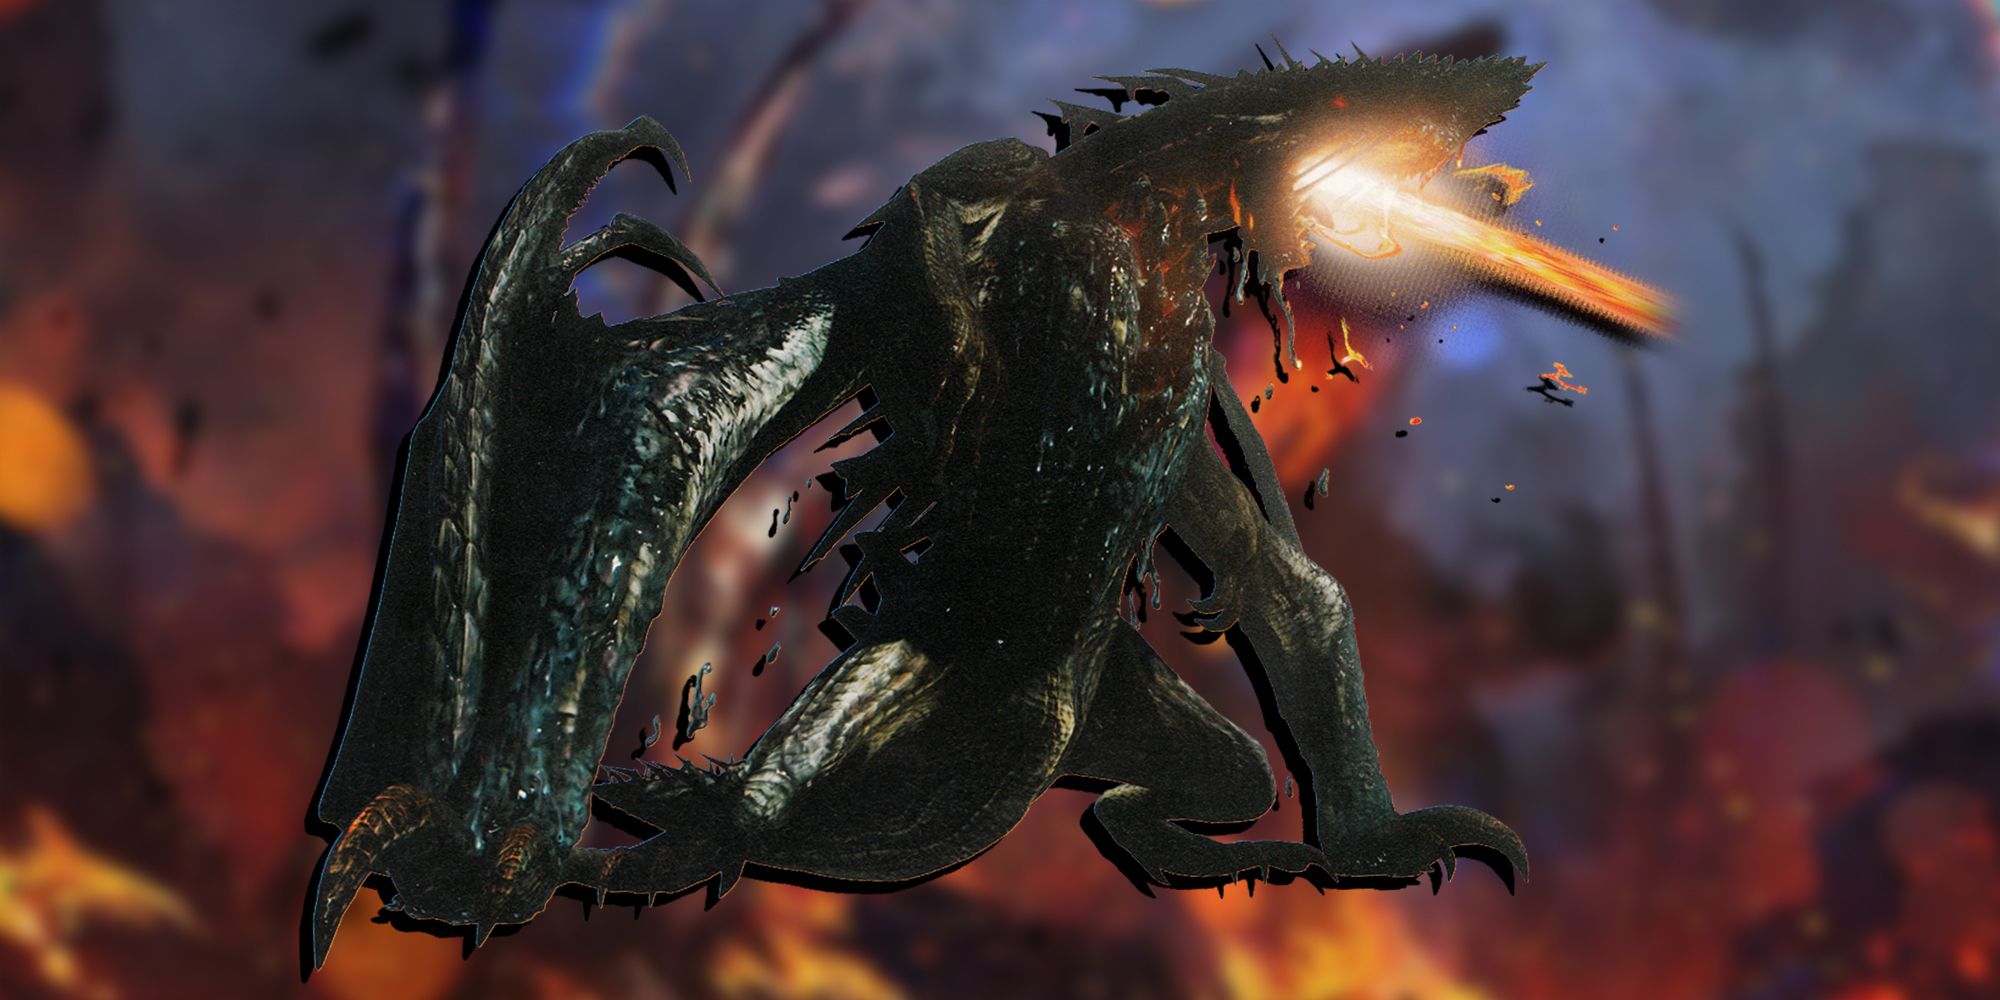 PNG Of Gogmazios Overlaid On Image Of Gogmazios Introduction Cutscene In Monster Hunter 4 Ultimate